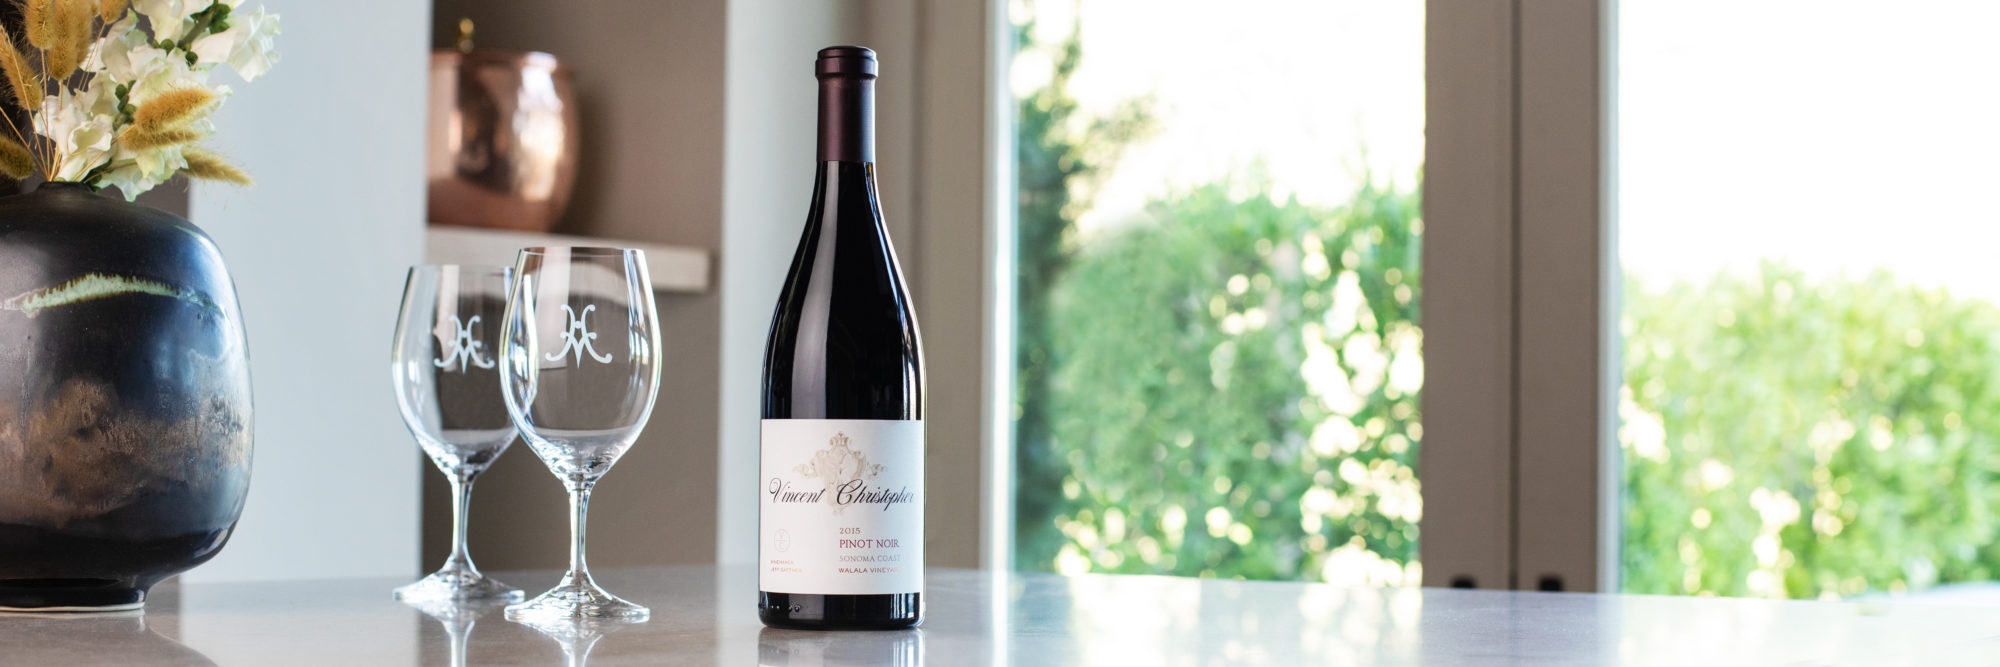 The 2015 Vincent Christopher Pinot Noir and glasses